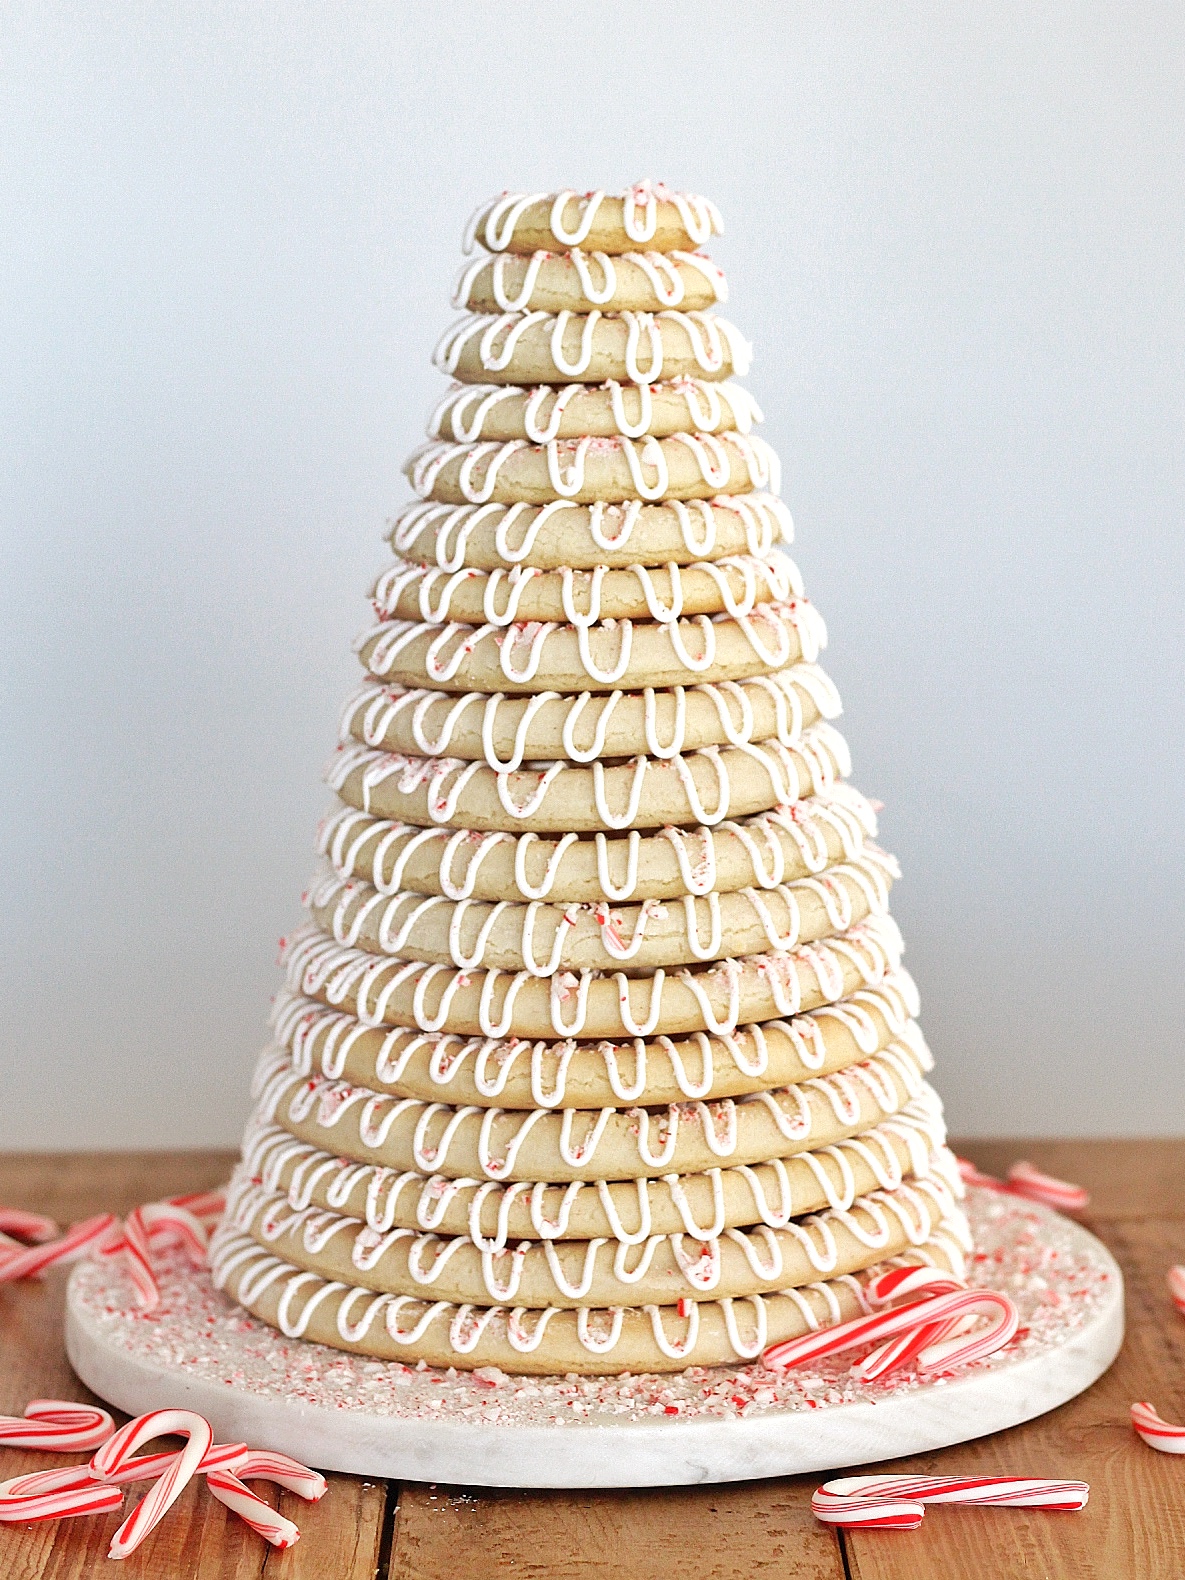 photo of Kransekake wreath-shaped cake with peppermint sprinkles